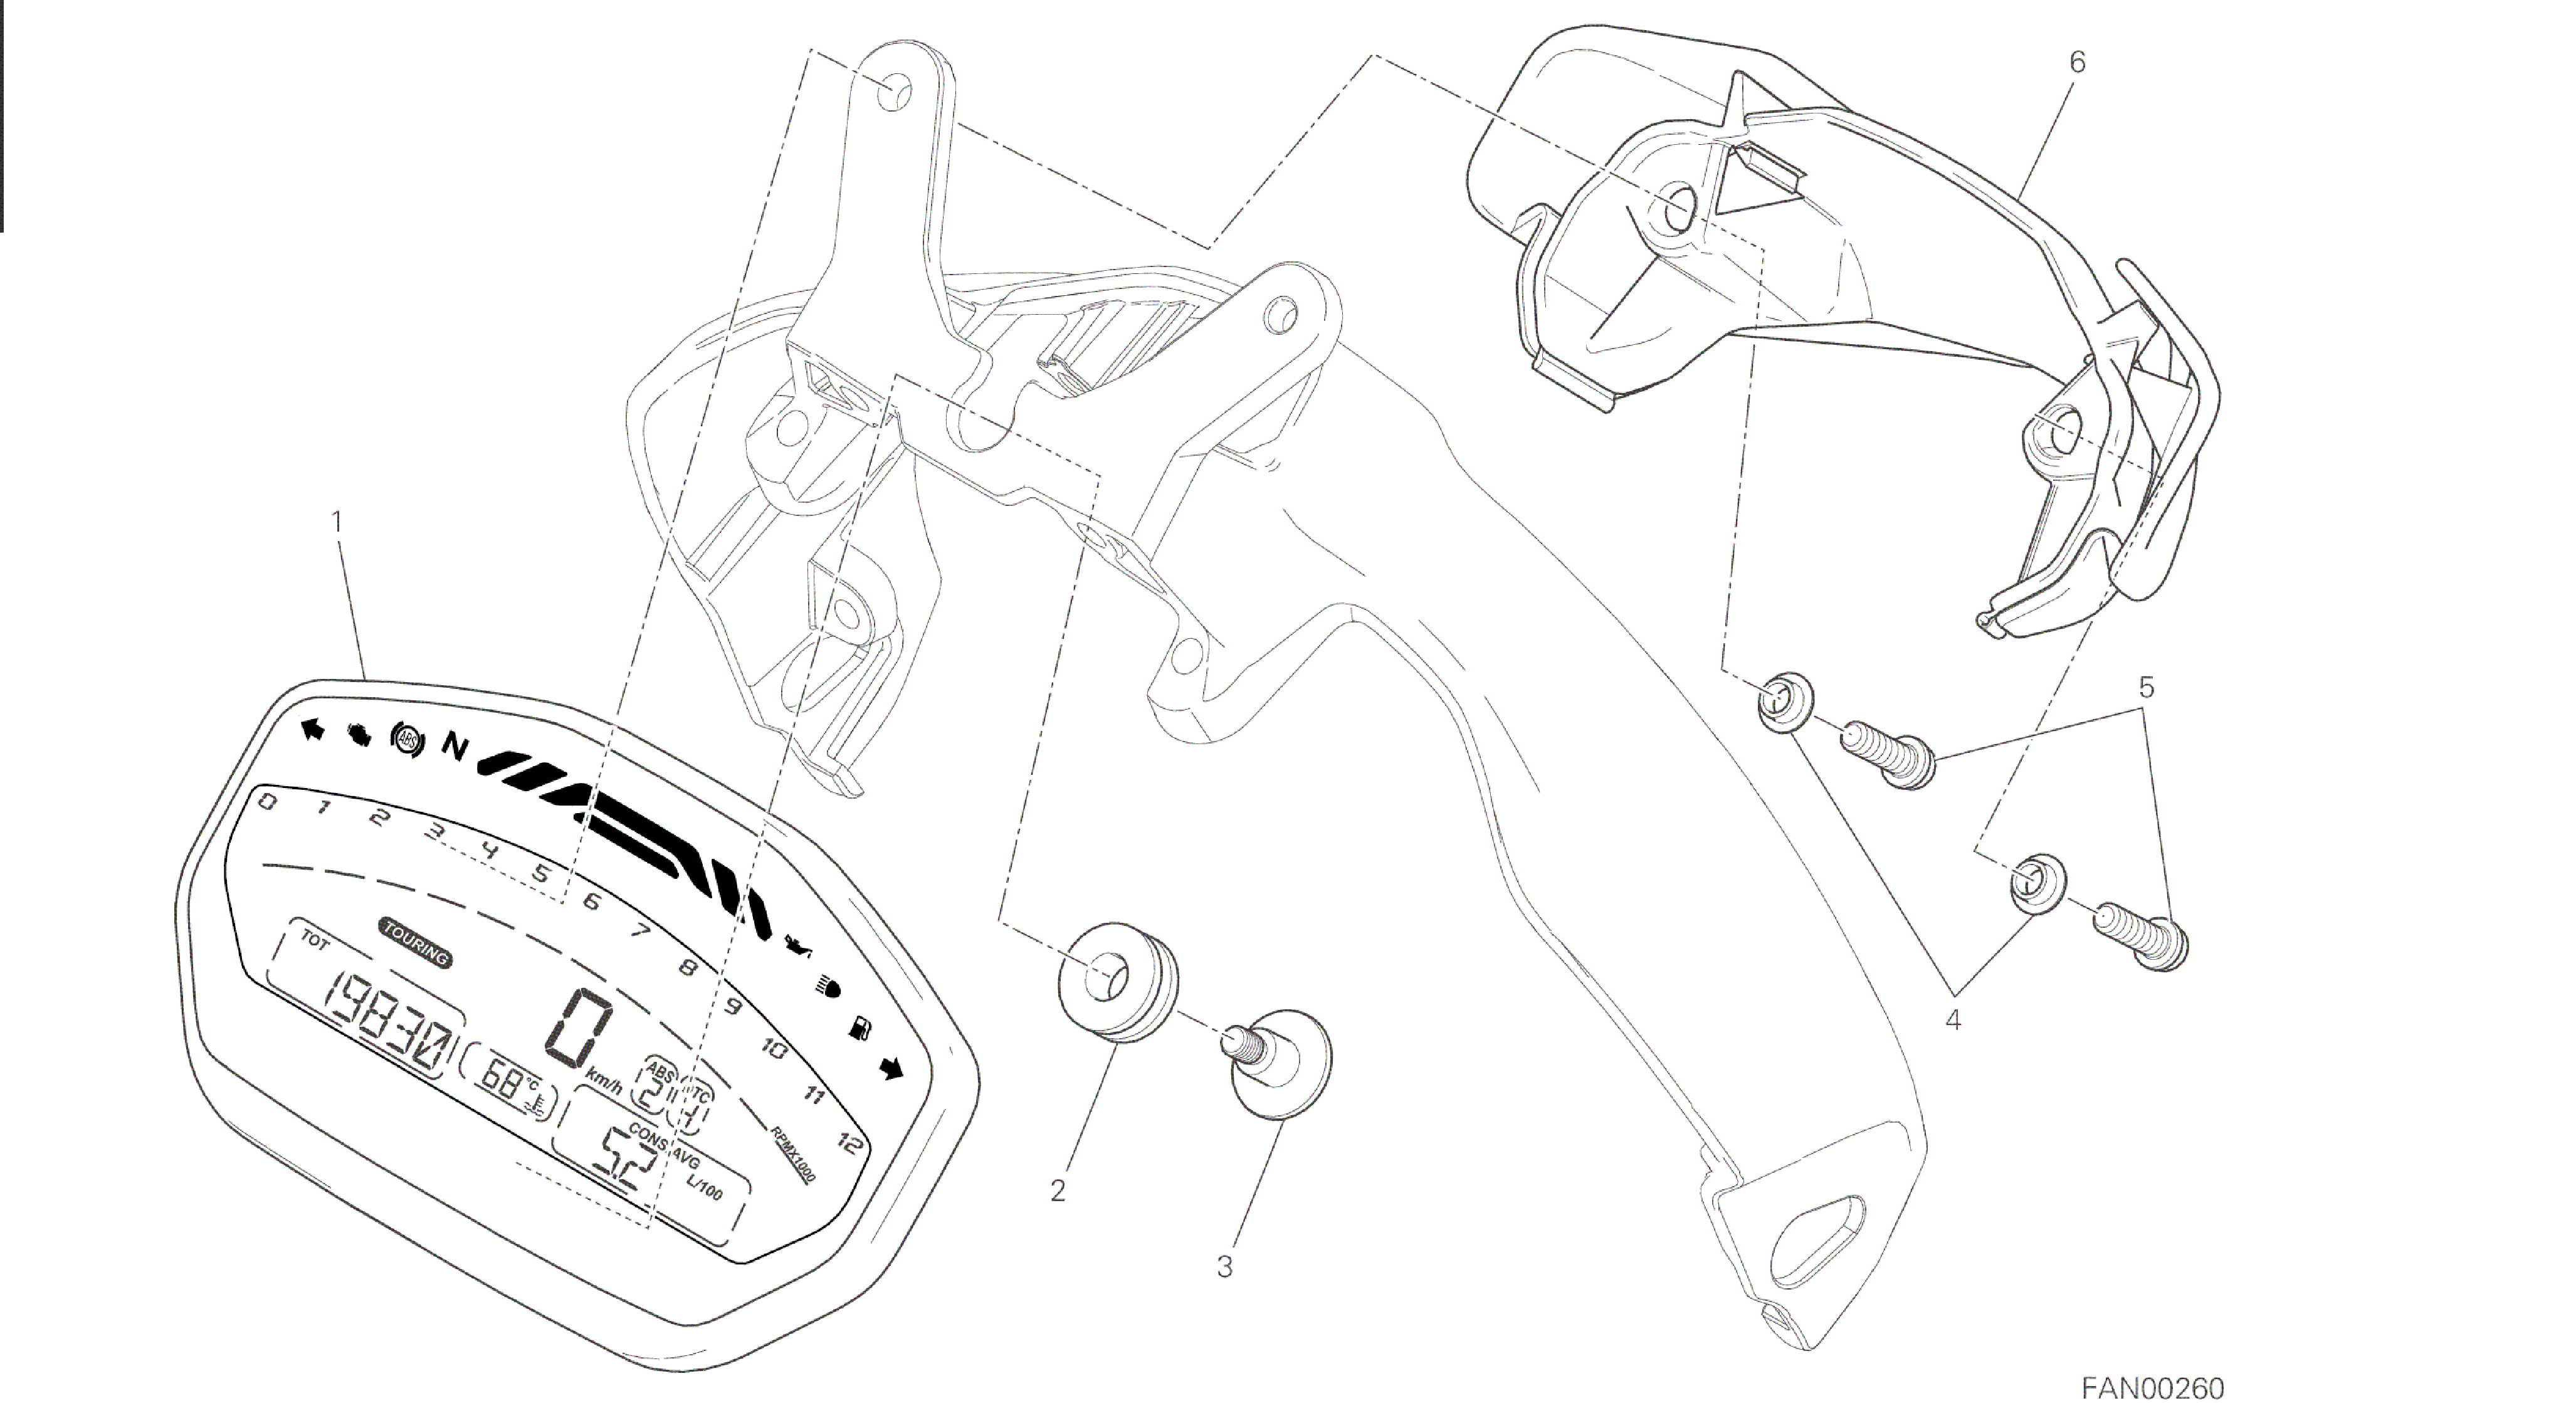 DRAWING 20A - INSTRUMENT PANEL [MOD:M 821]GROUP ELECTRIC